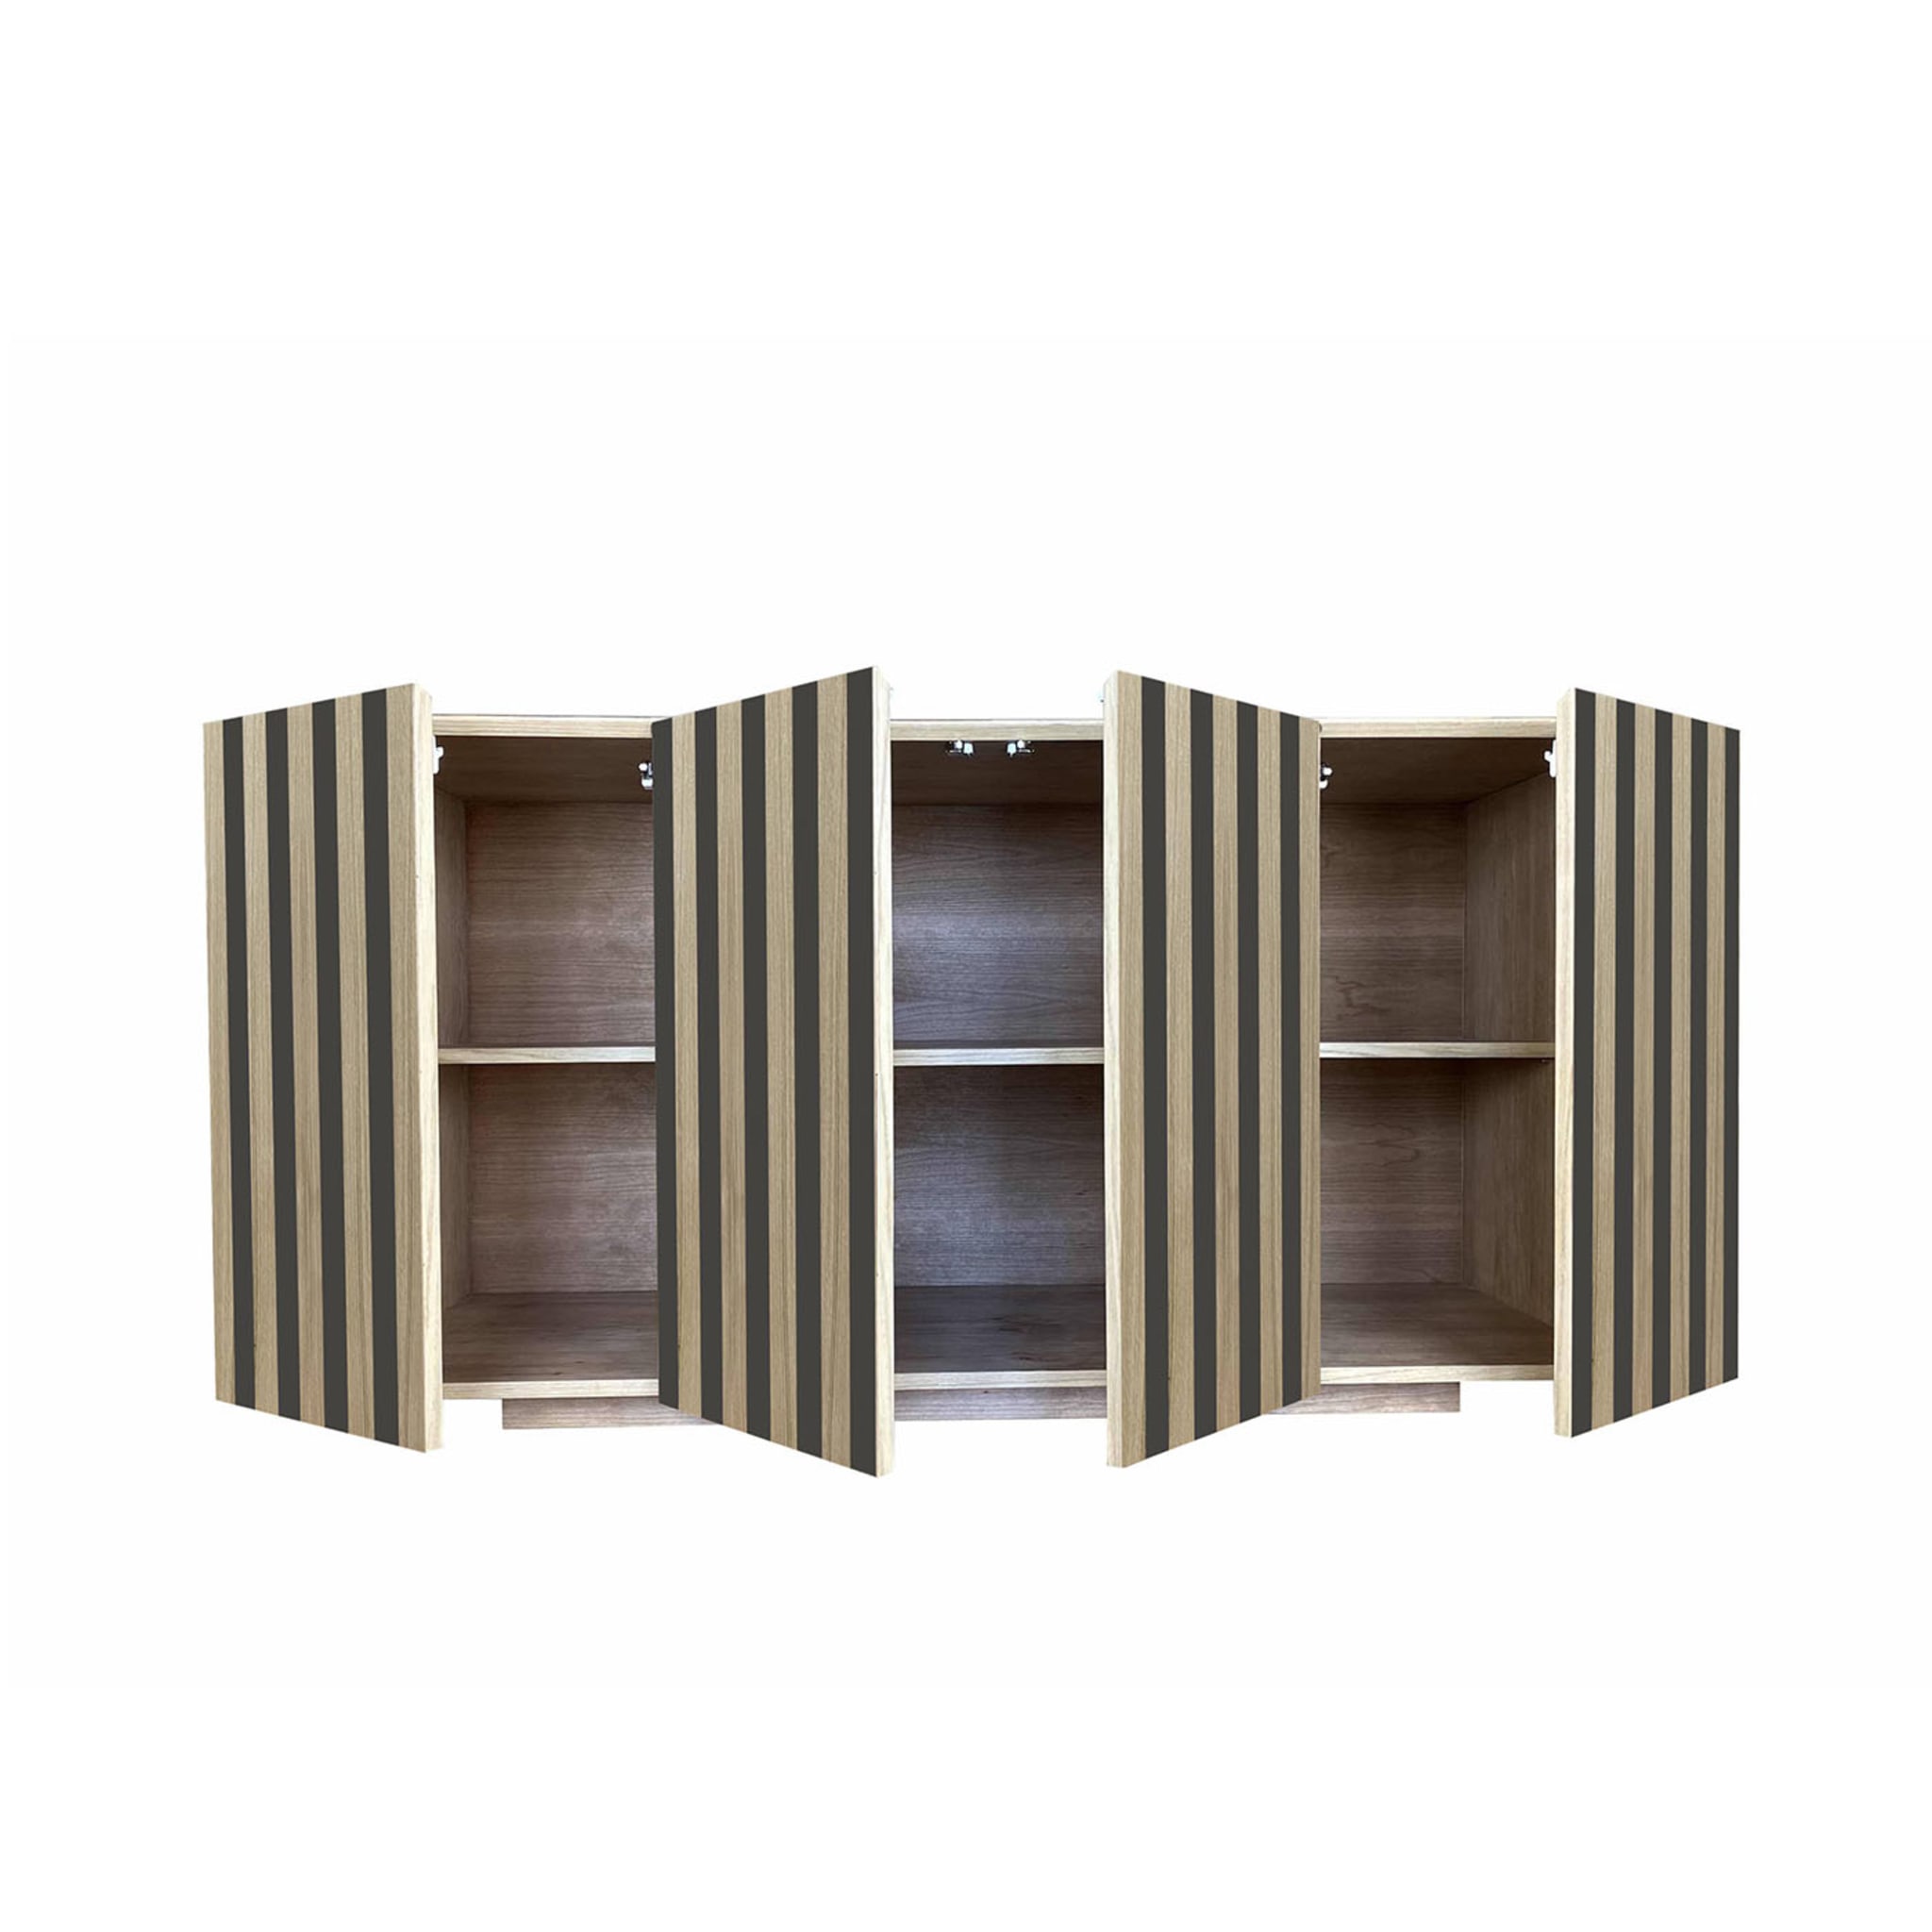 Md1 4-Door Striped Sideboard by Meccani Studio - Alternative view 4